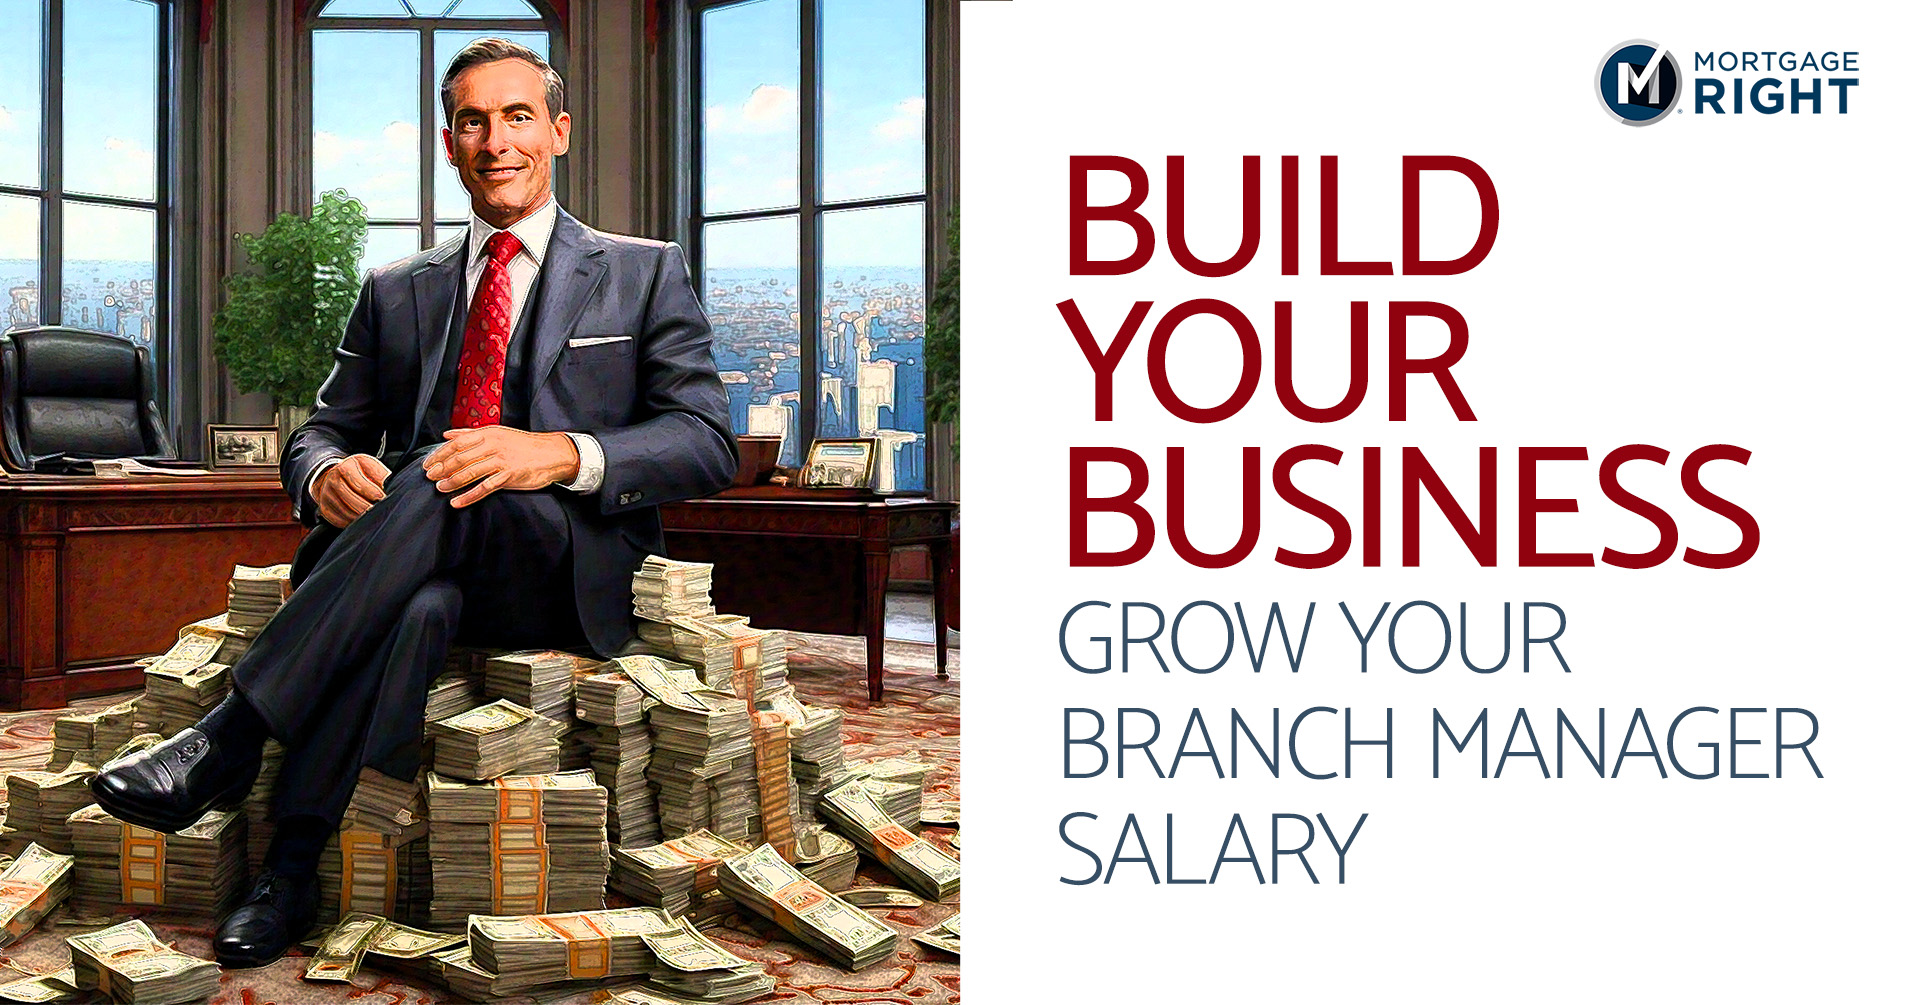 Grow your mortgage branch business and your mortgage branch manager salary